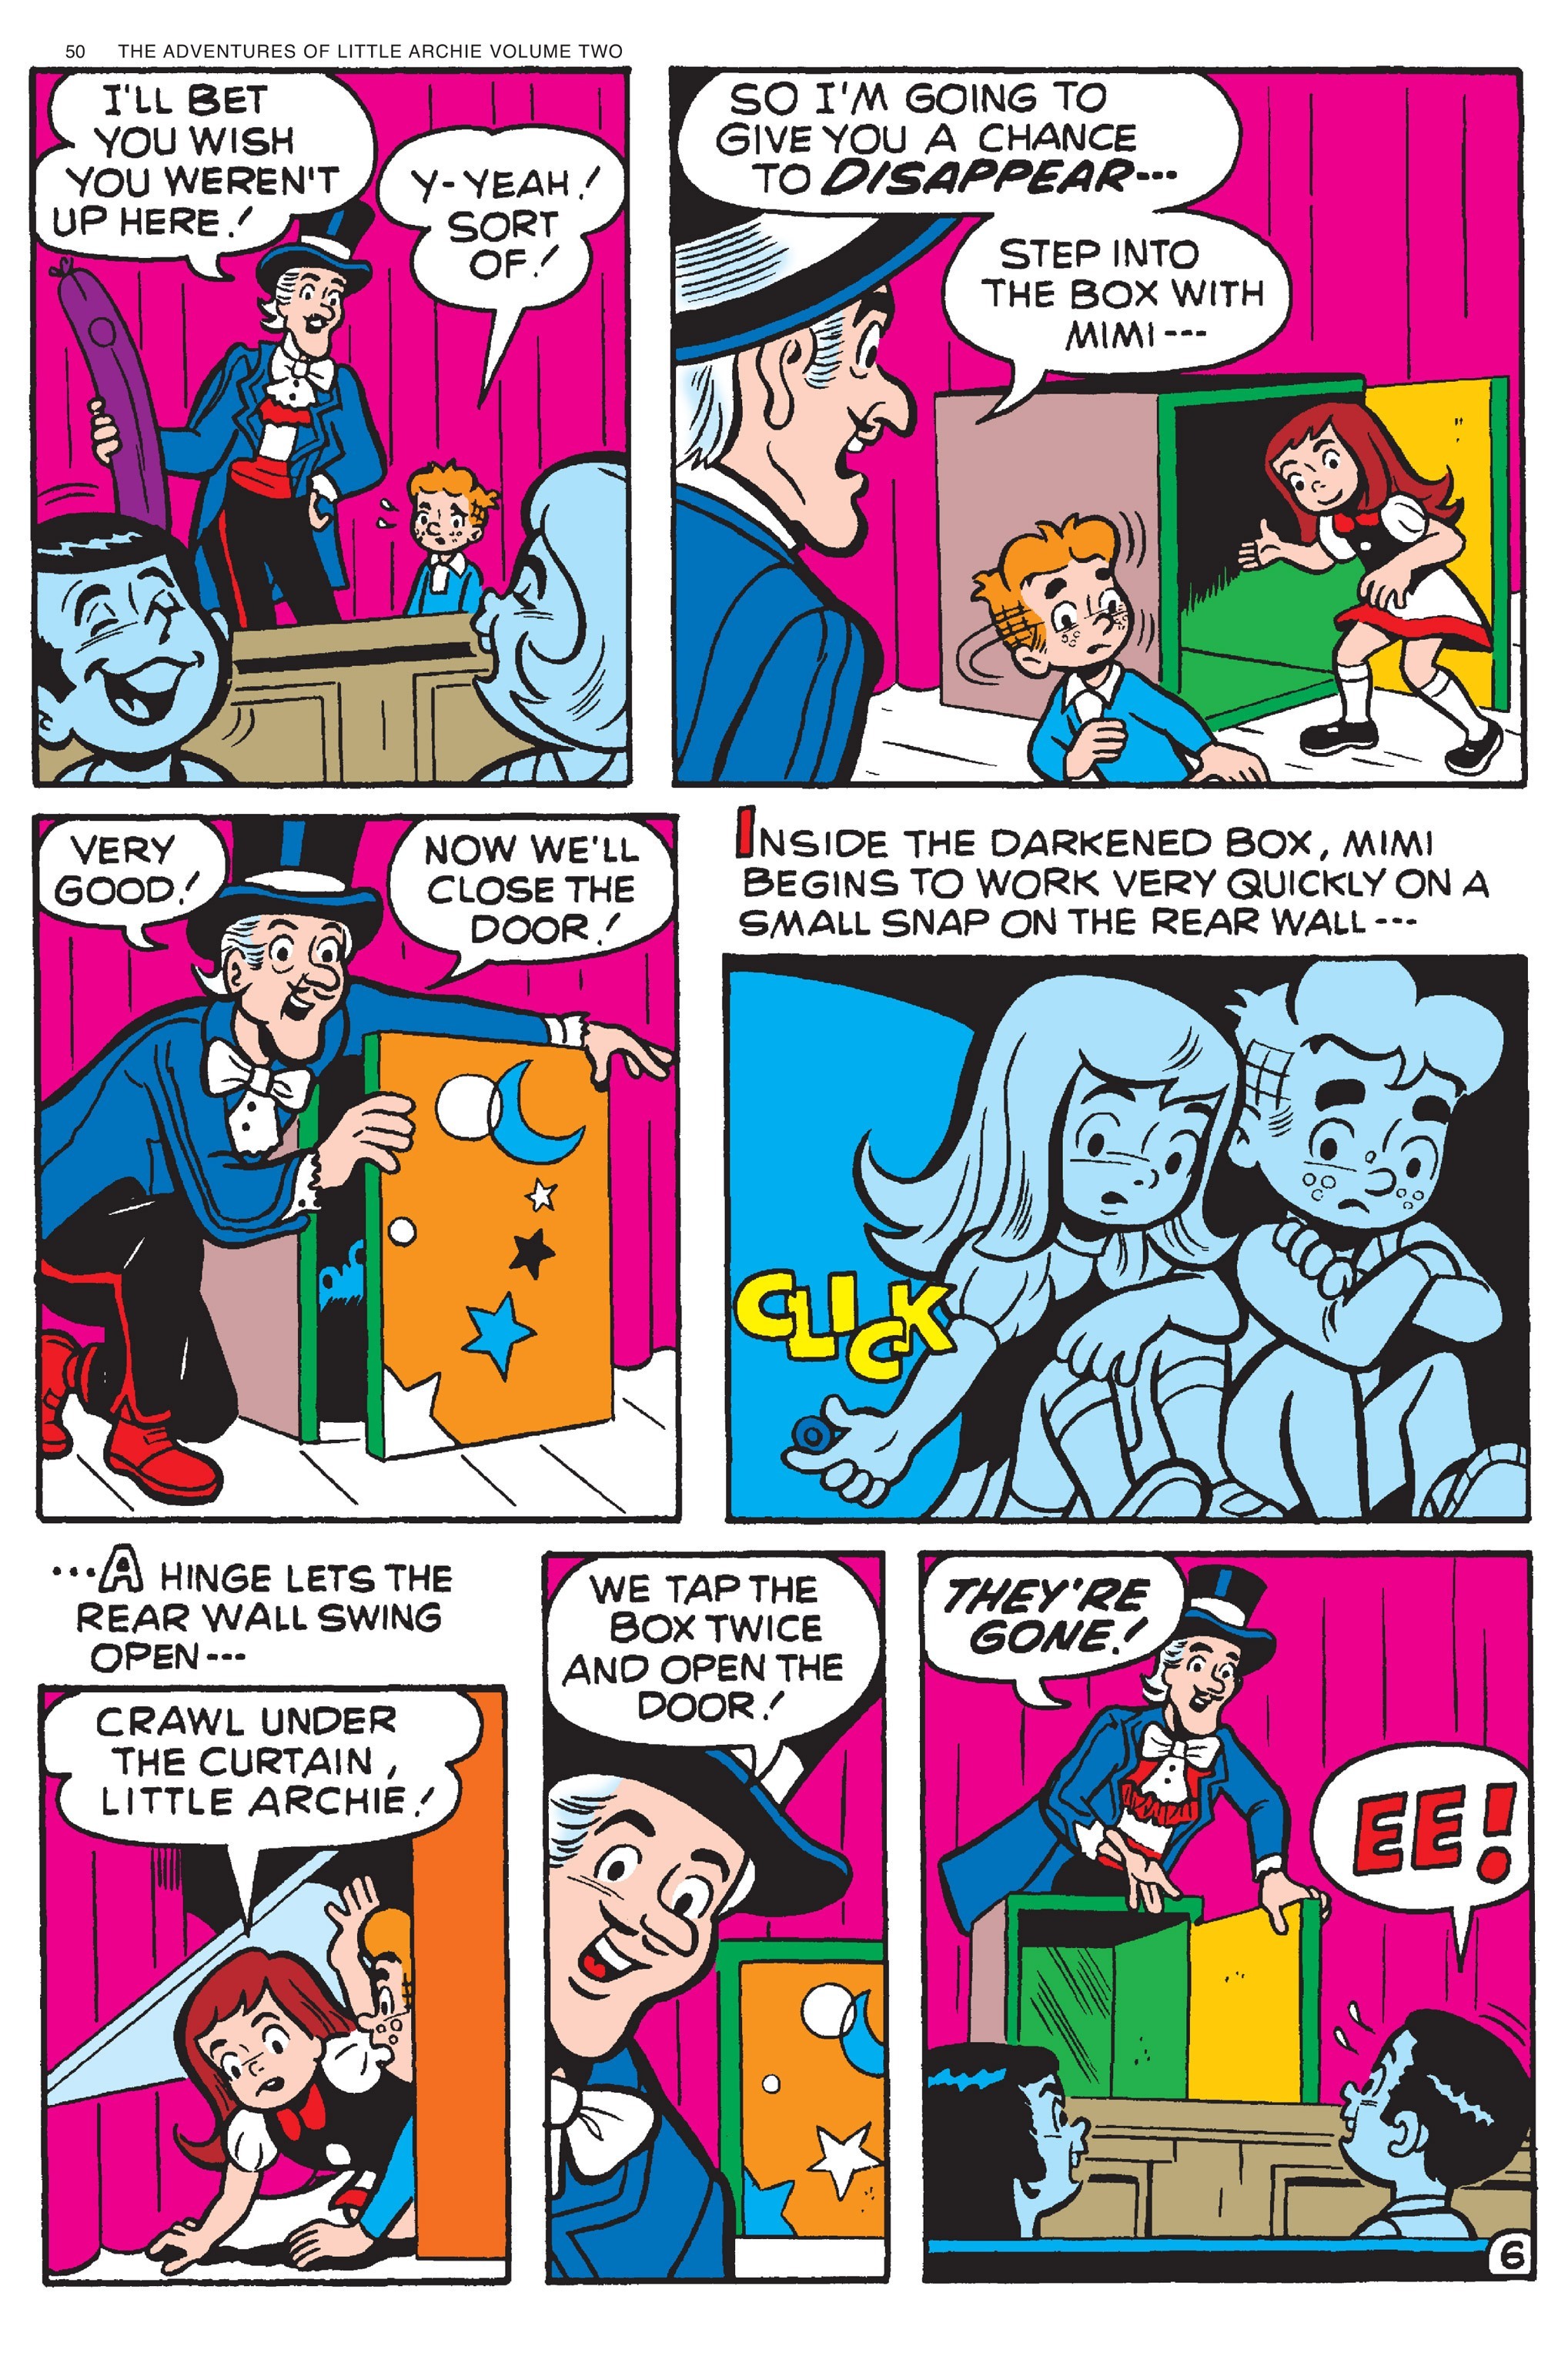 Read online Adventures of Little Archie comic -  Issue # TPB 2 - 51